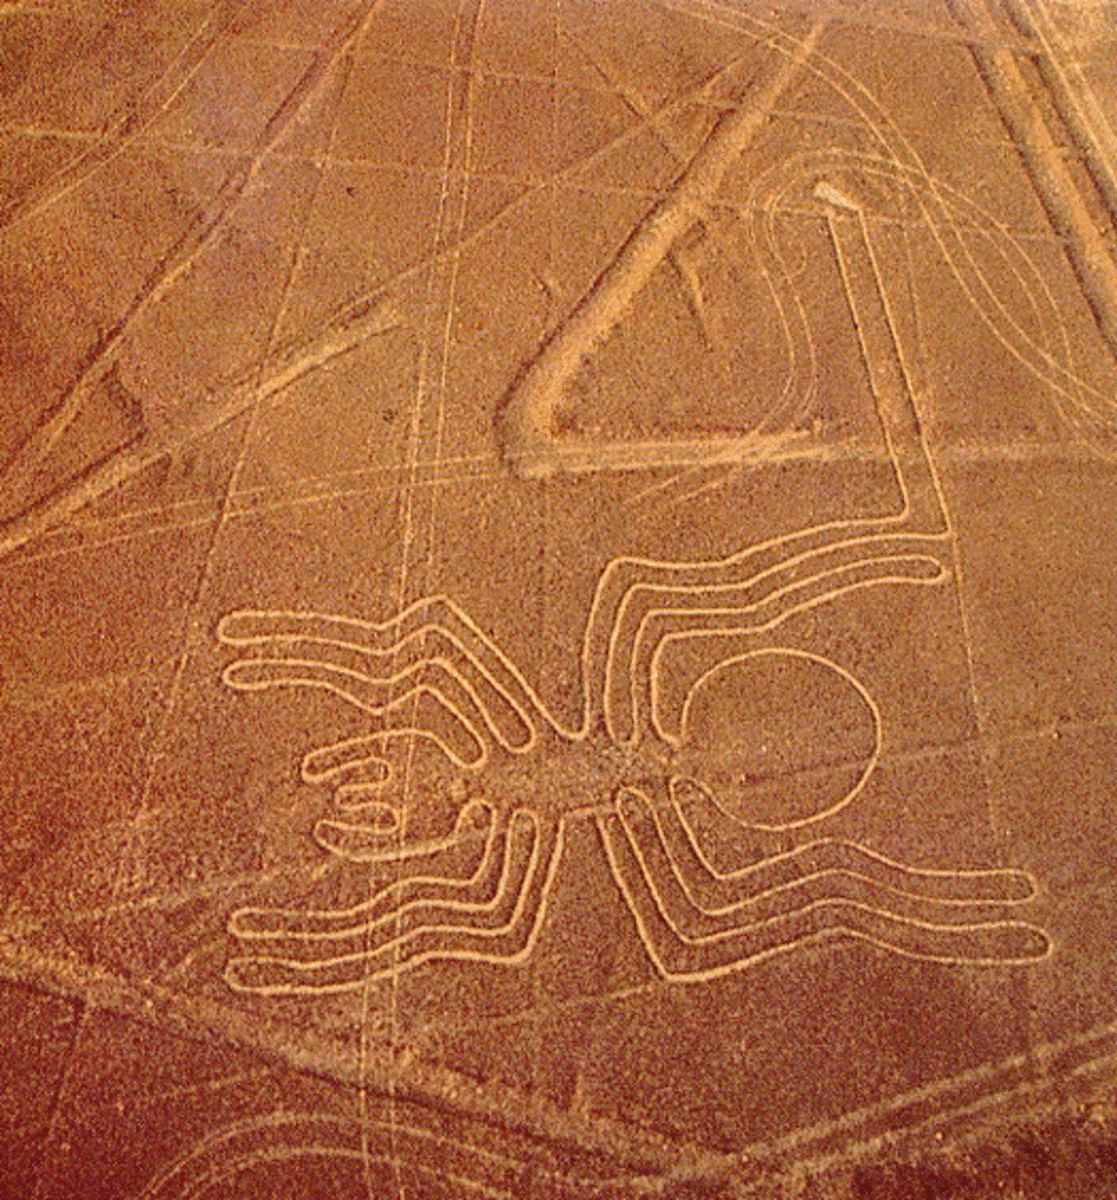 A spider geoglyph created by the Nazca people.